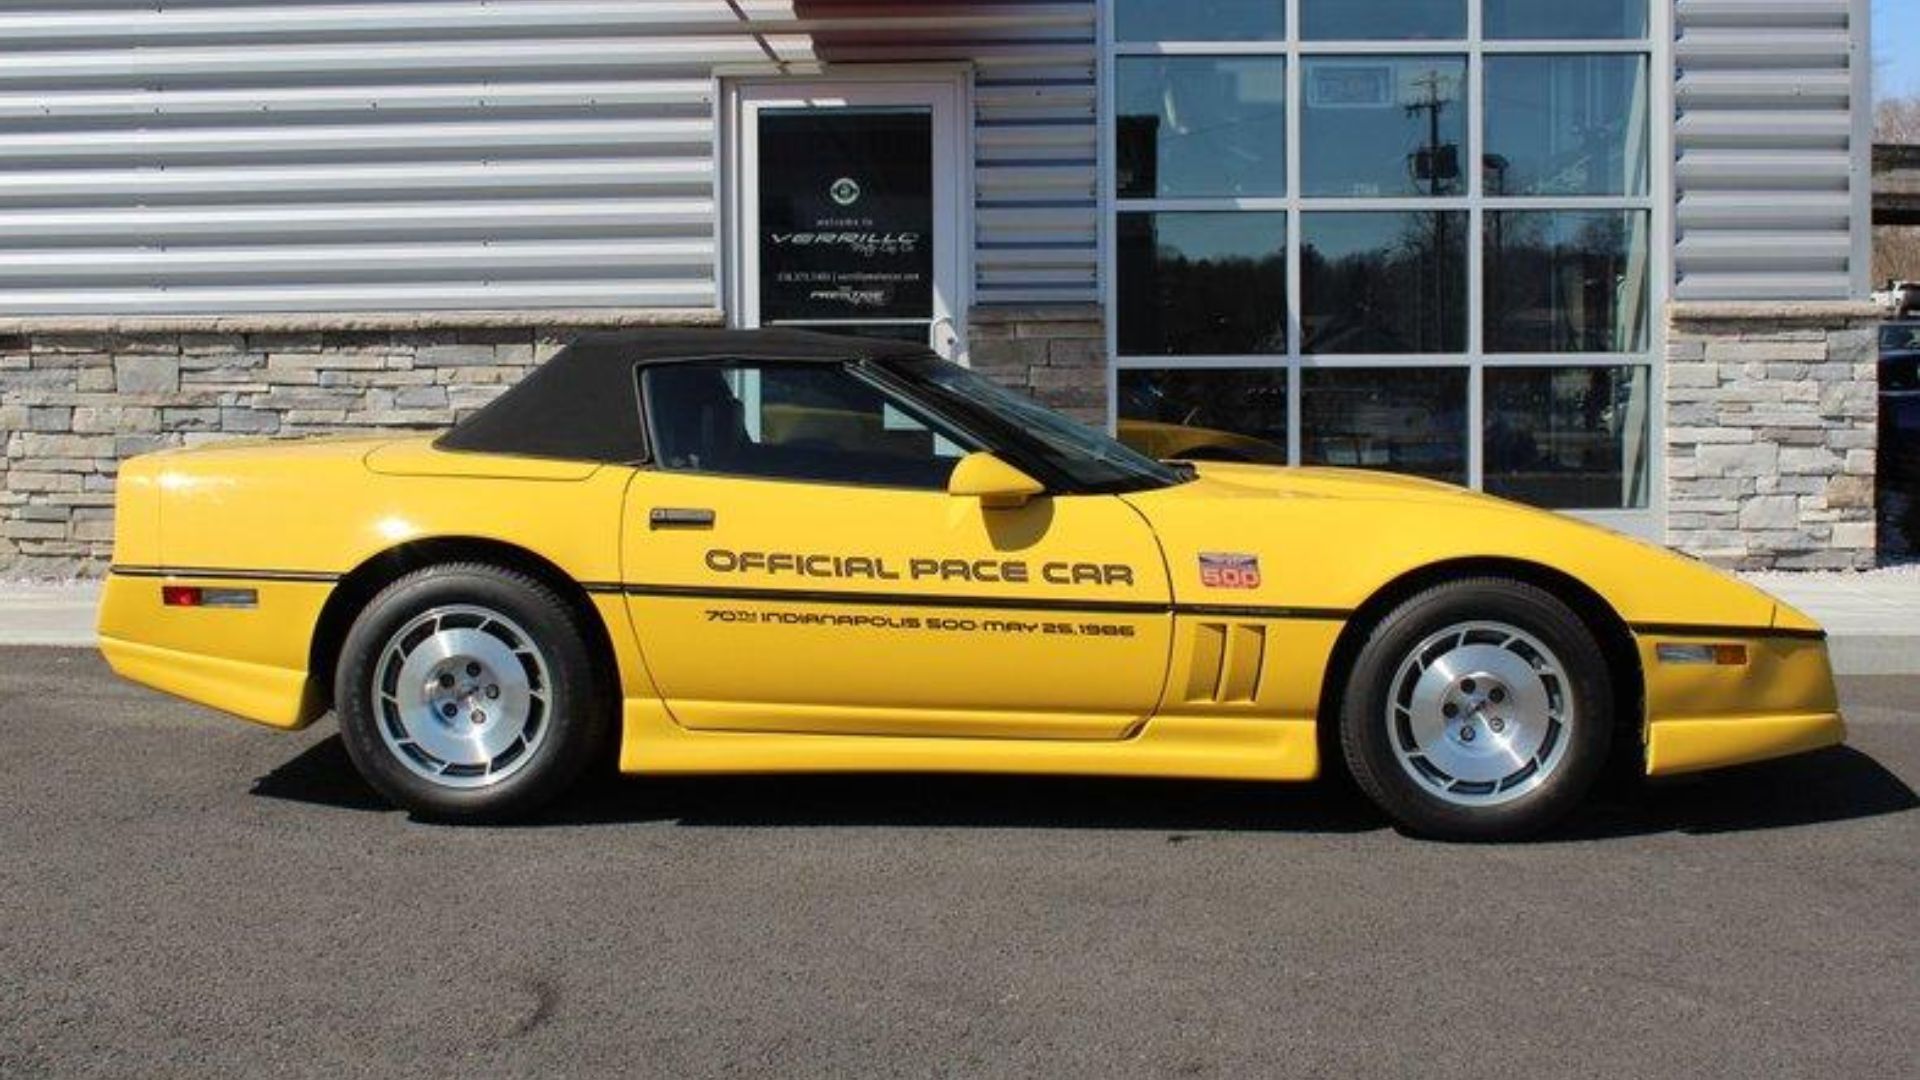 1986 Chevy Corvette Indianapolis 500 Pace Car Offers Drop-Top Fun